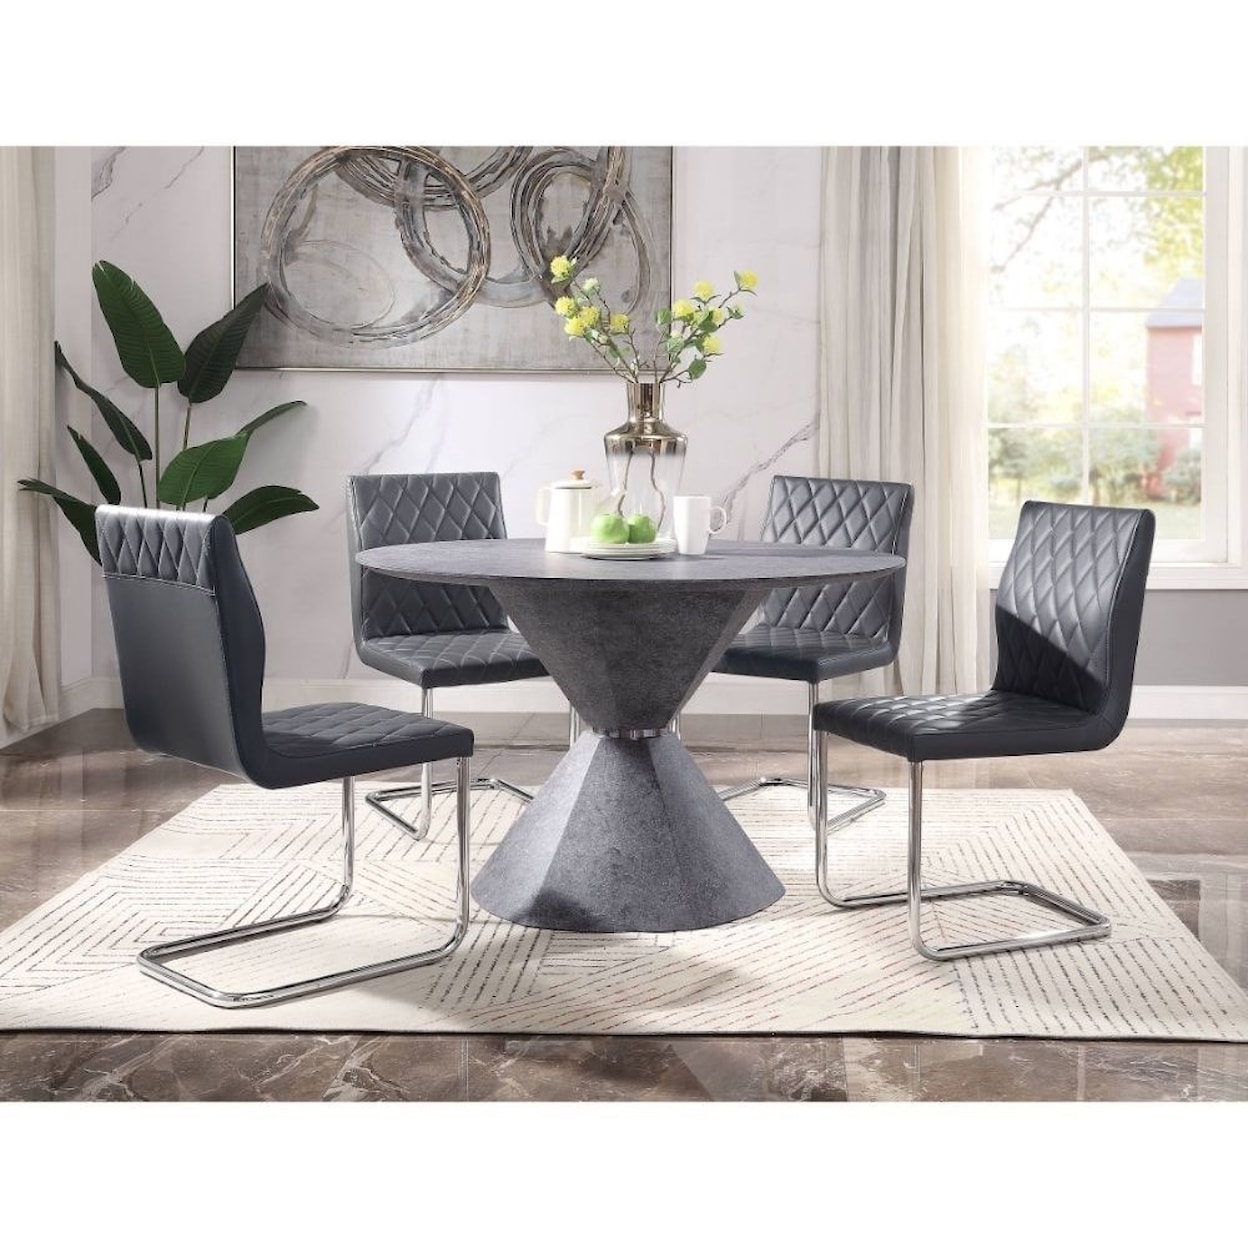 Acme Furniture Ansonia 5-Piece Table and Chair Set